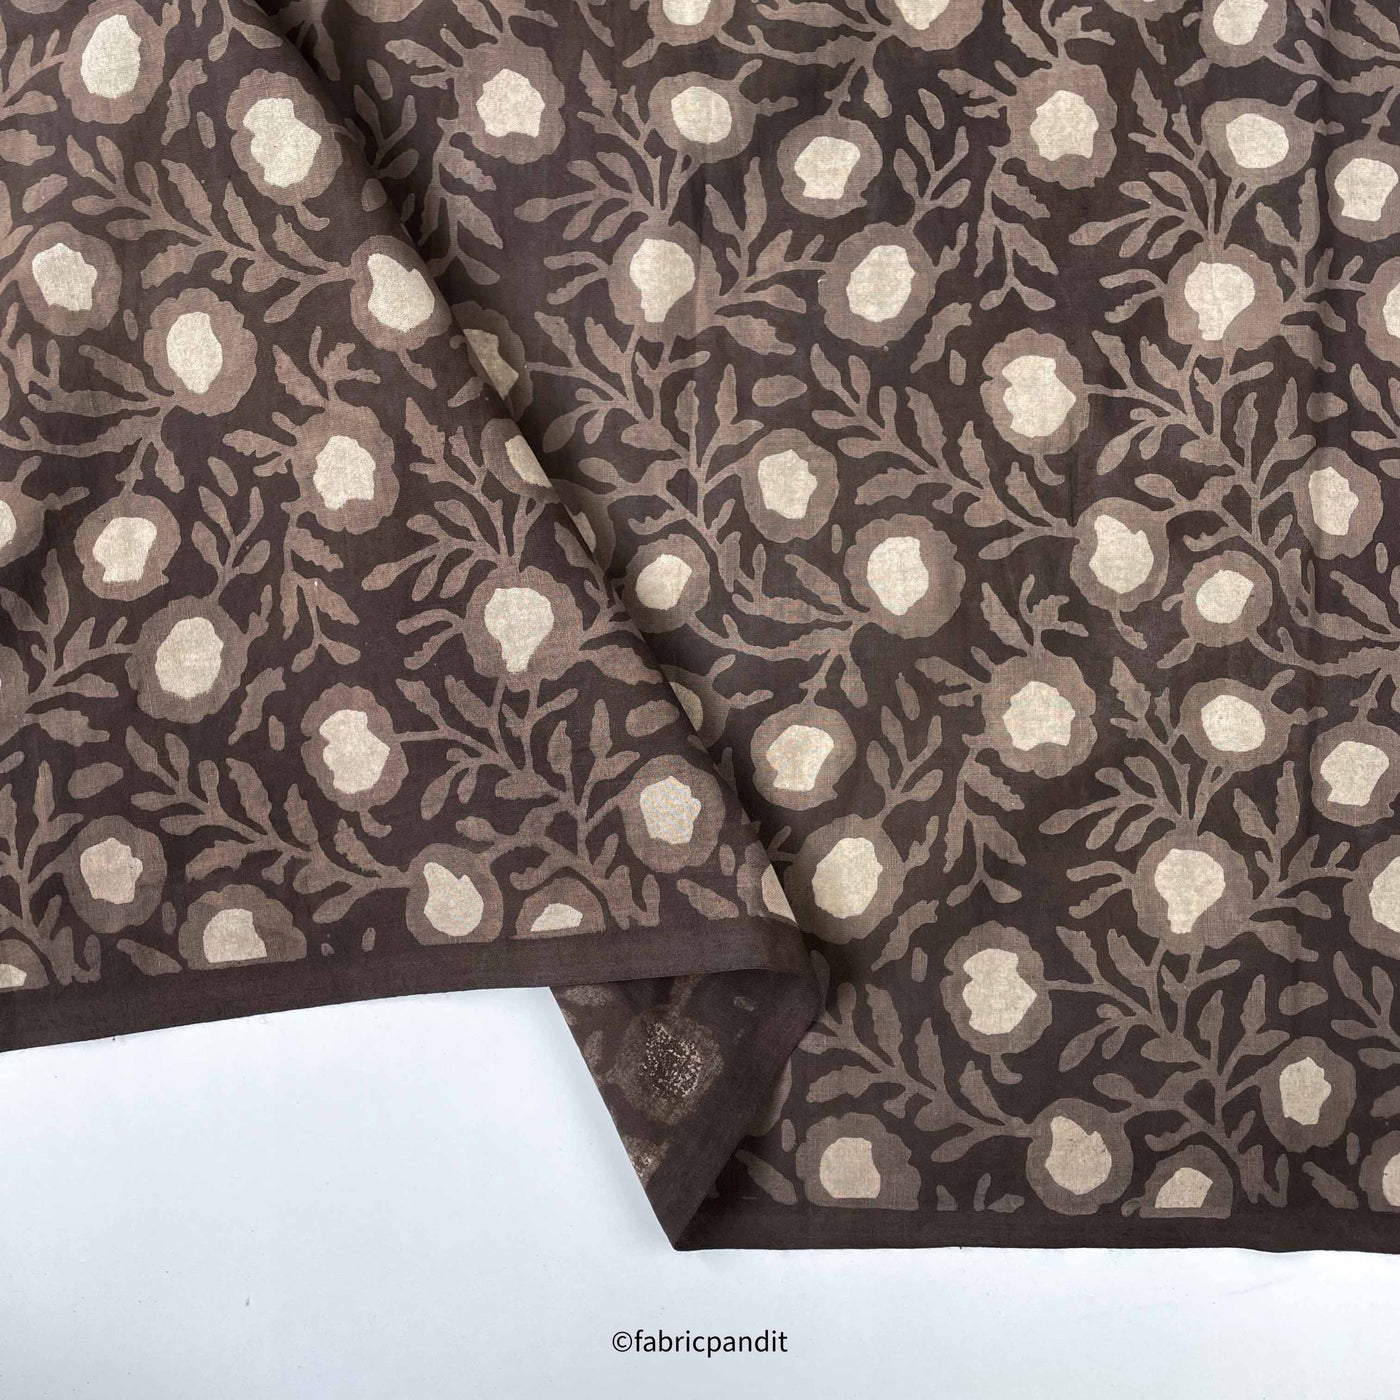 Fabric Pandit Fabric Brown Indigo Dabu Natural Dyed Floral Vines Hand Block Printed Pure Cotton Modal Fabric (Width 42 inches)